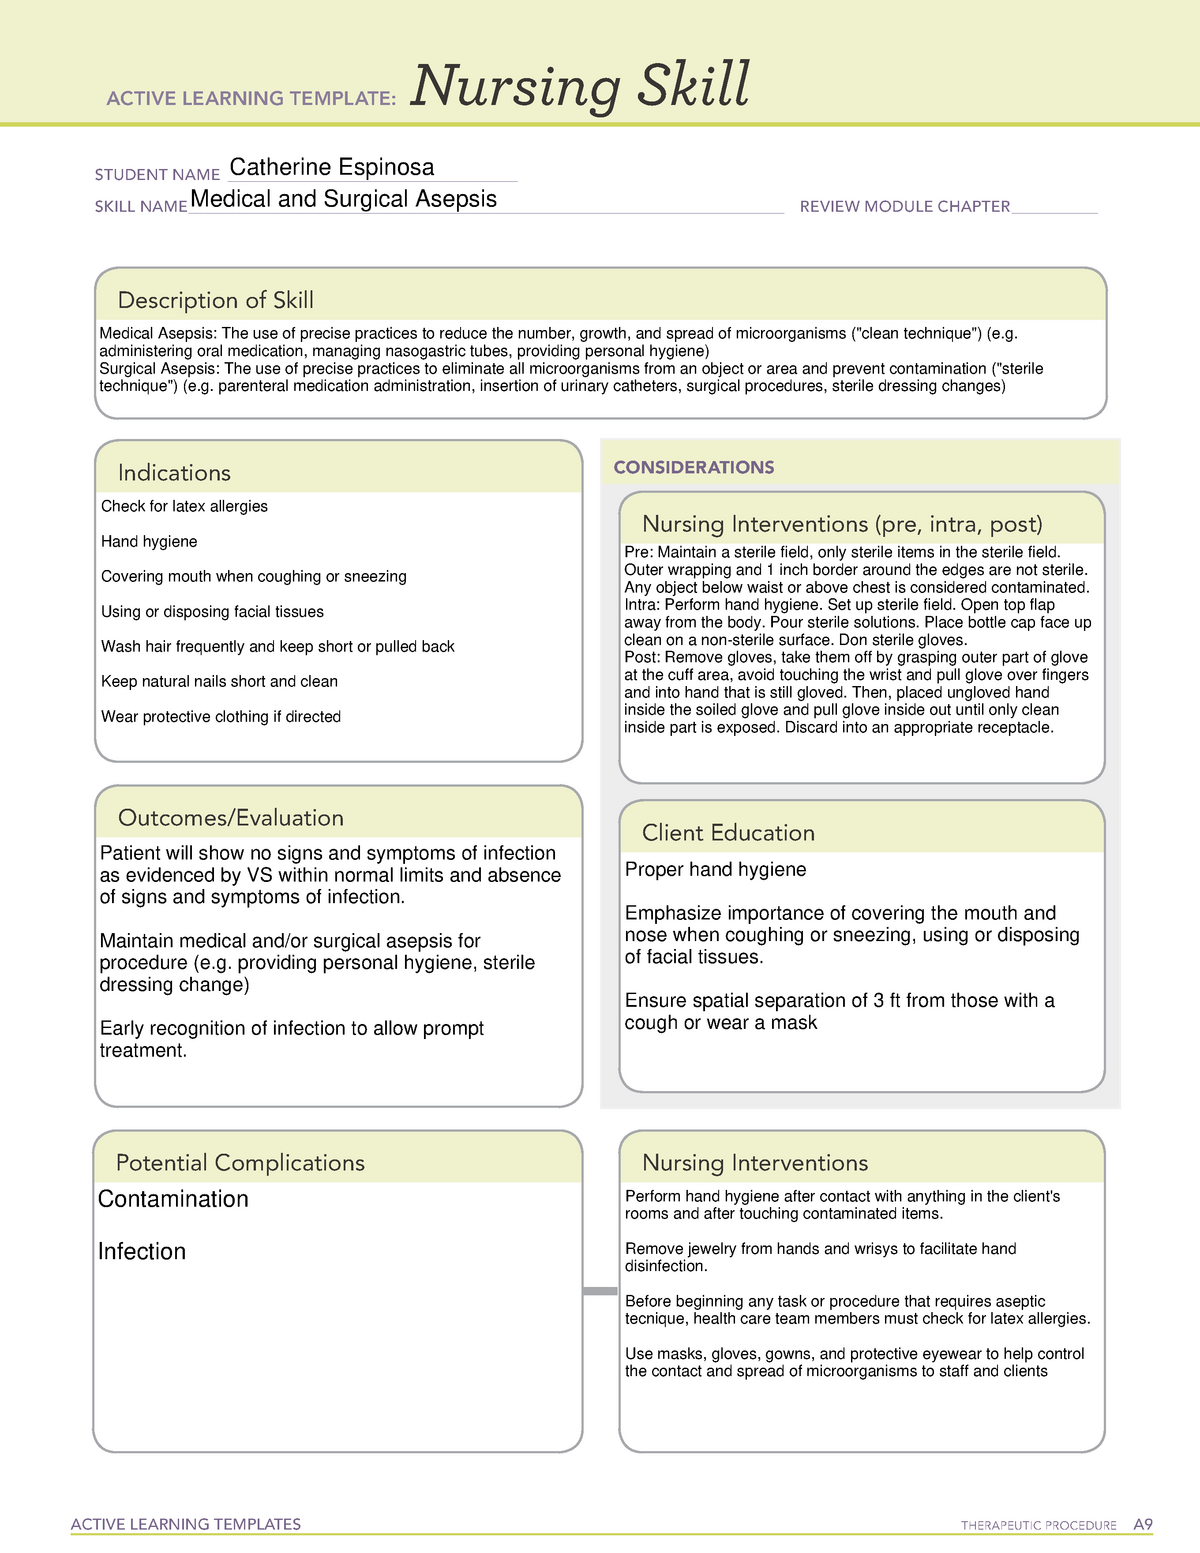 Medical and Surgical Asepsis ACTIVE LEARNING TEMPLATES THERAPEUTIC PROCEDURE A Nursing Skill